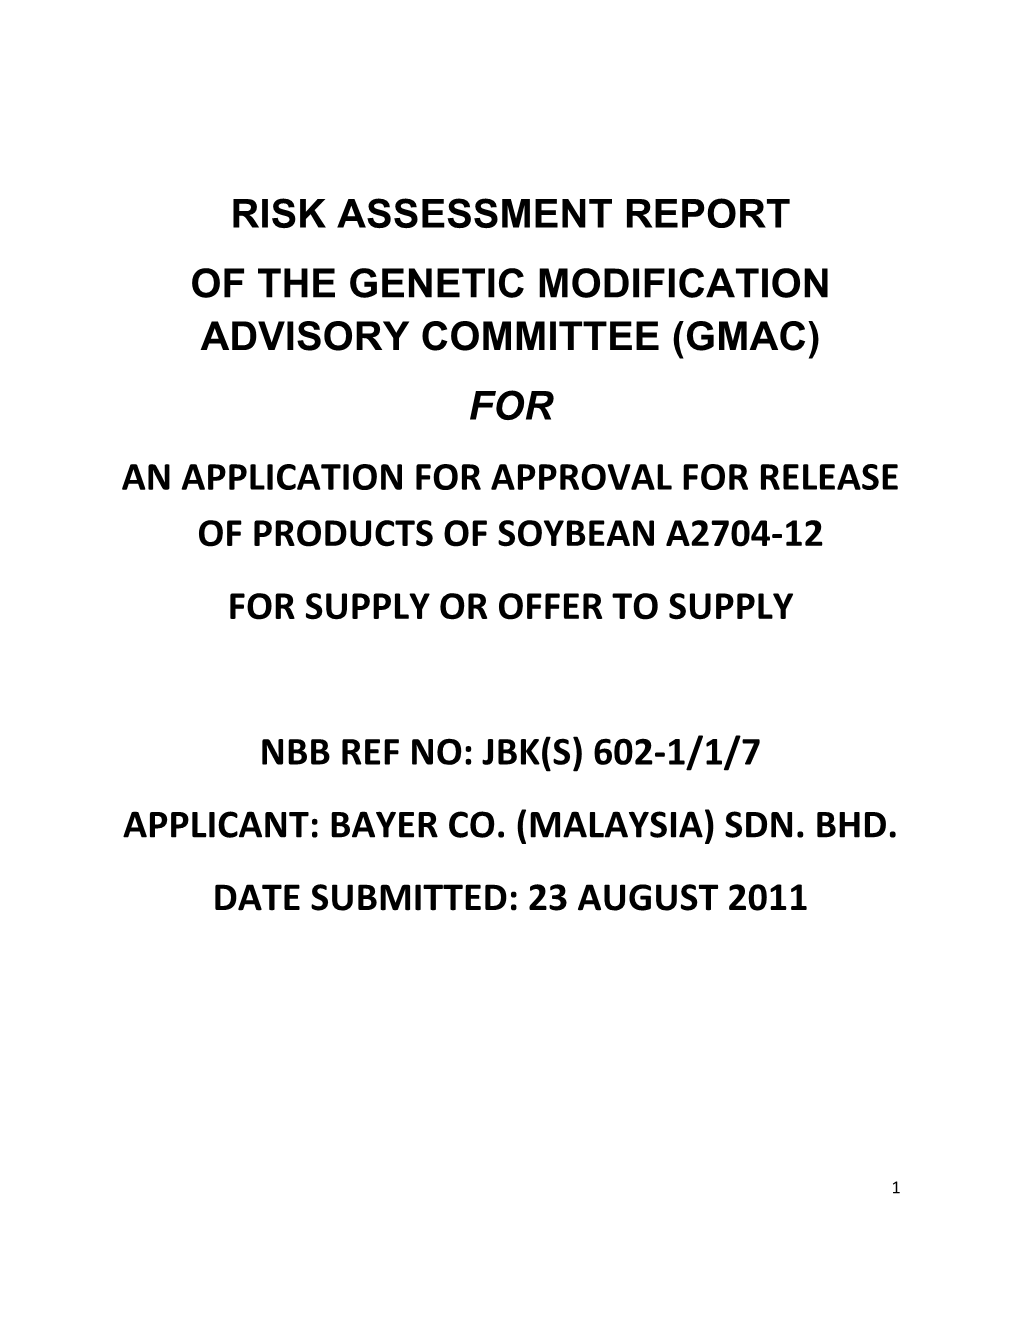 Risk Assessment Report of the Genetic